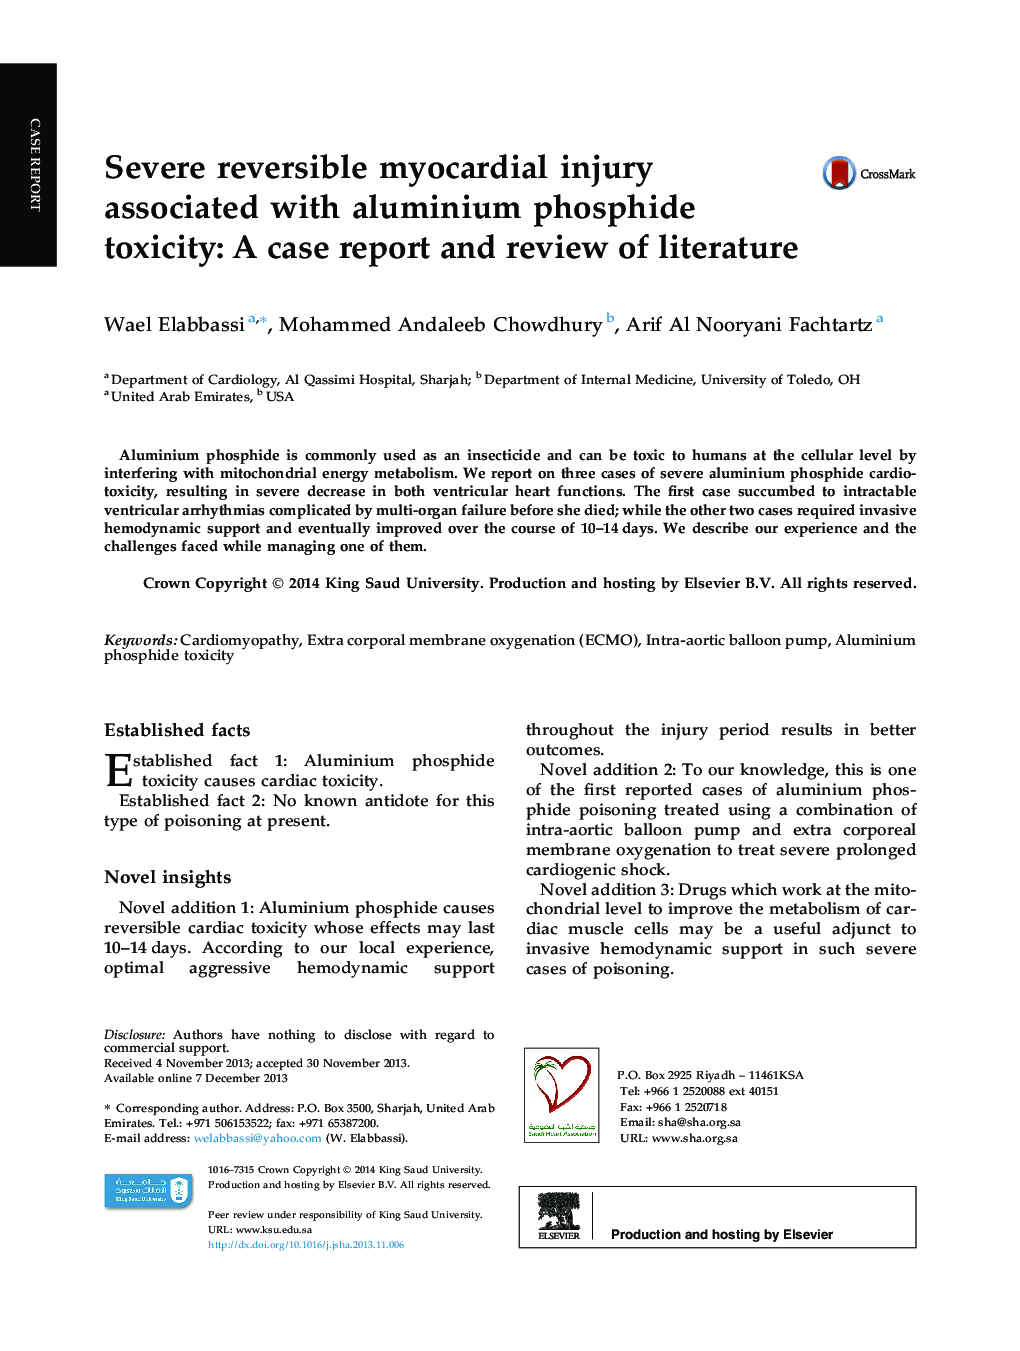 Severe reversible myocardial injury associated with aluminium phosphide toxicity: A case report and review of literature 